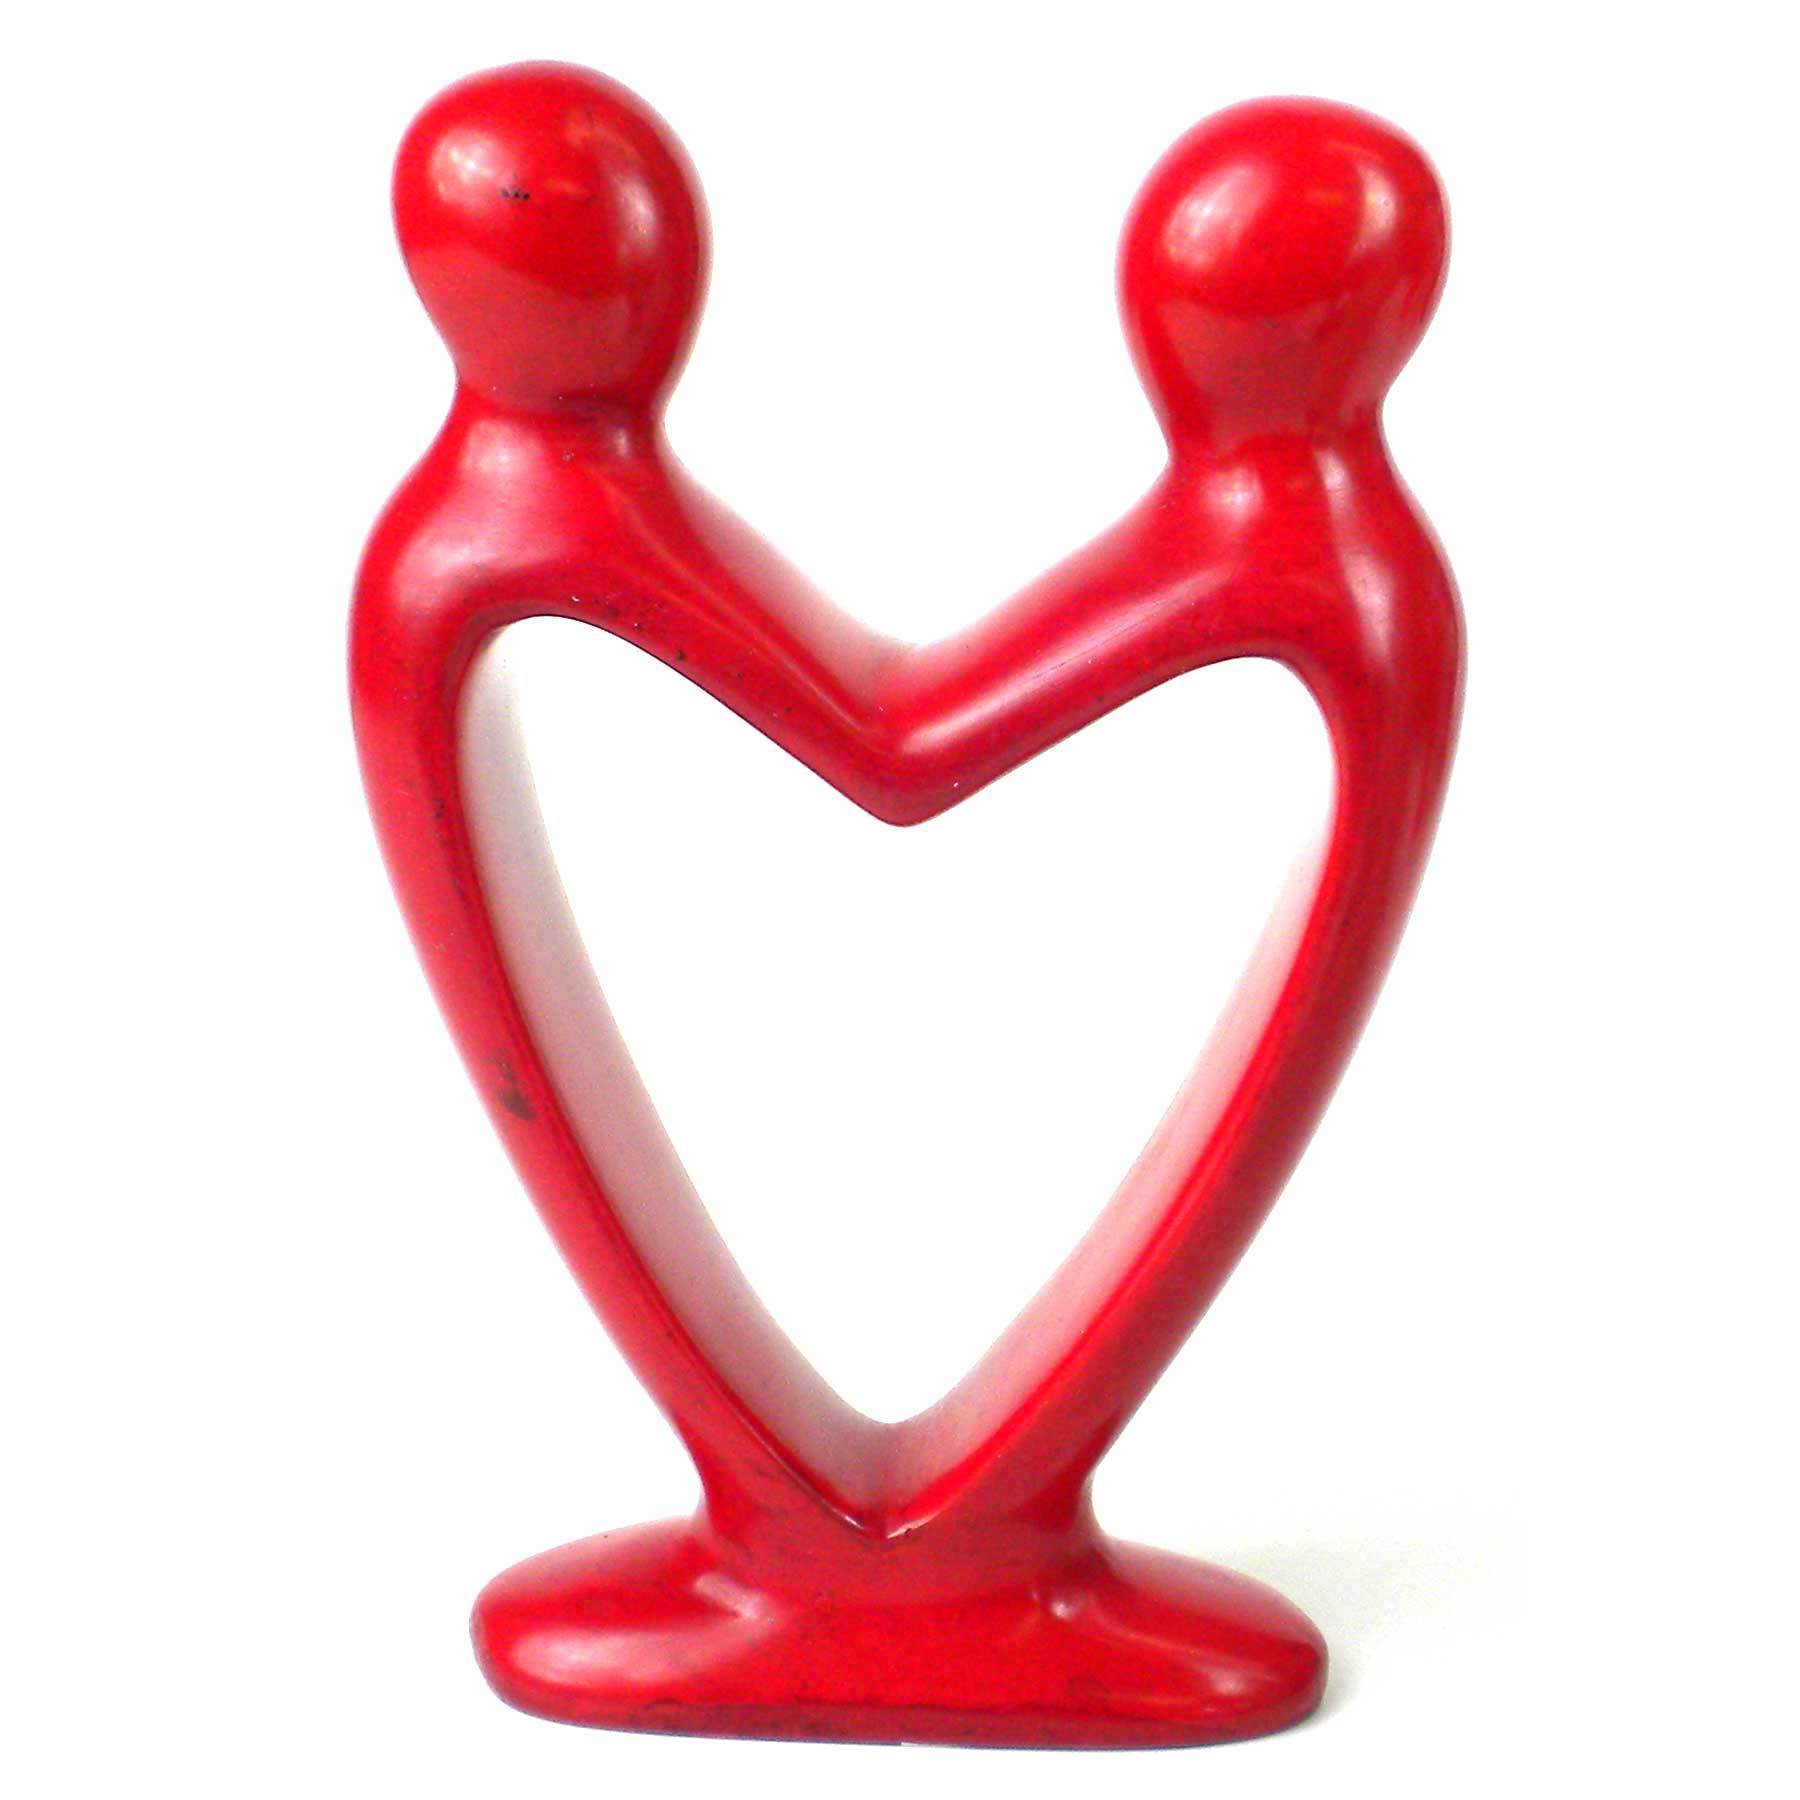 Maiden afgår Ko Handcrafted Soapstone Lover's Heart Sculpture in Red